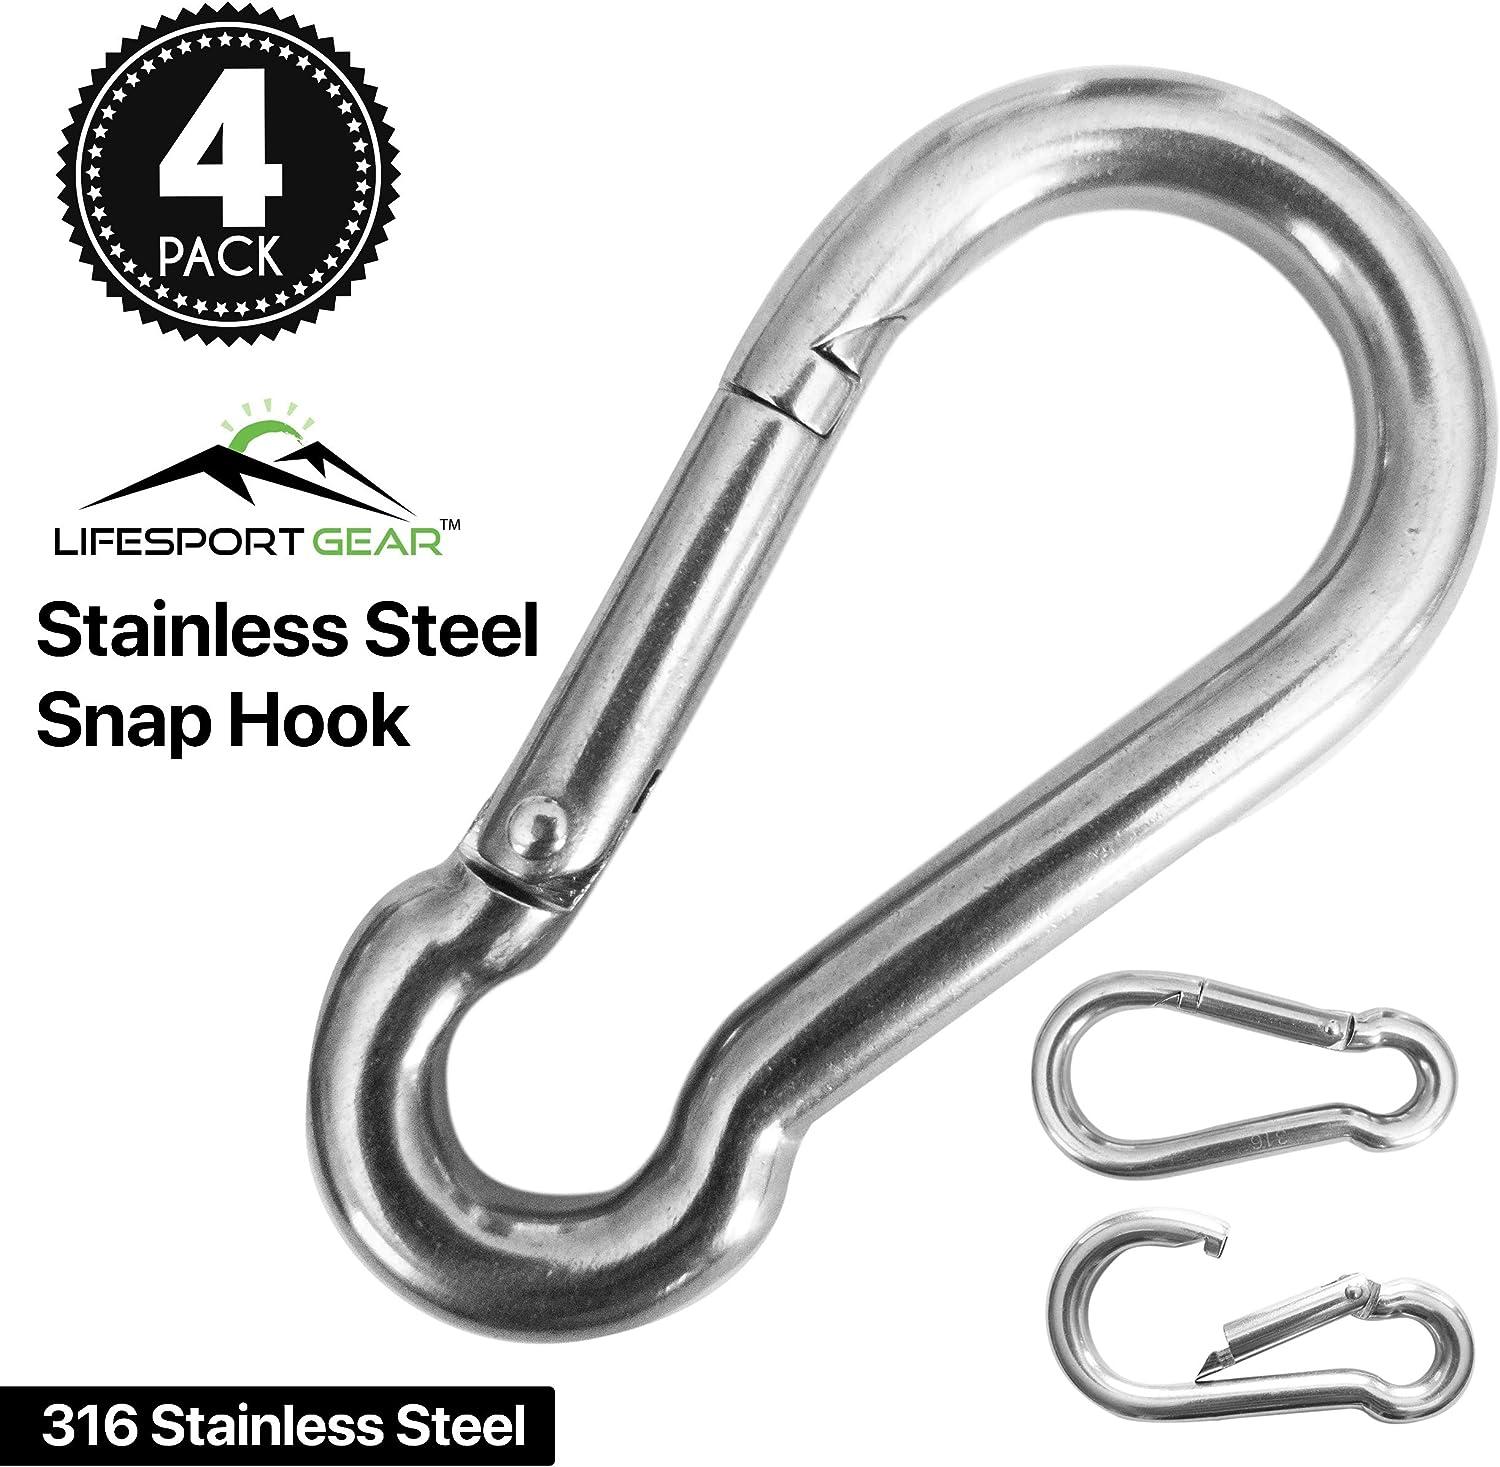 Marine Grade 316 Marked Stainless Steel Carabiner Clips, Heavy